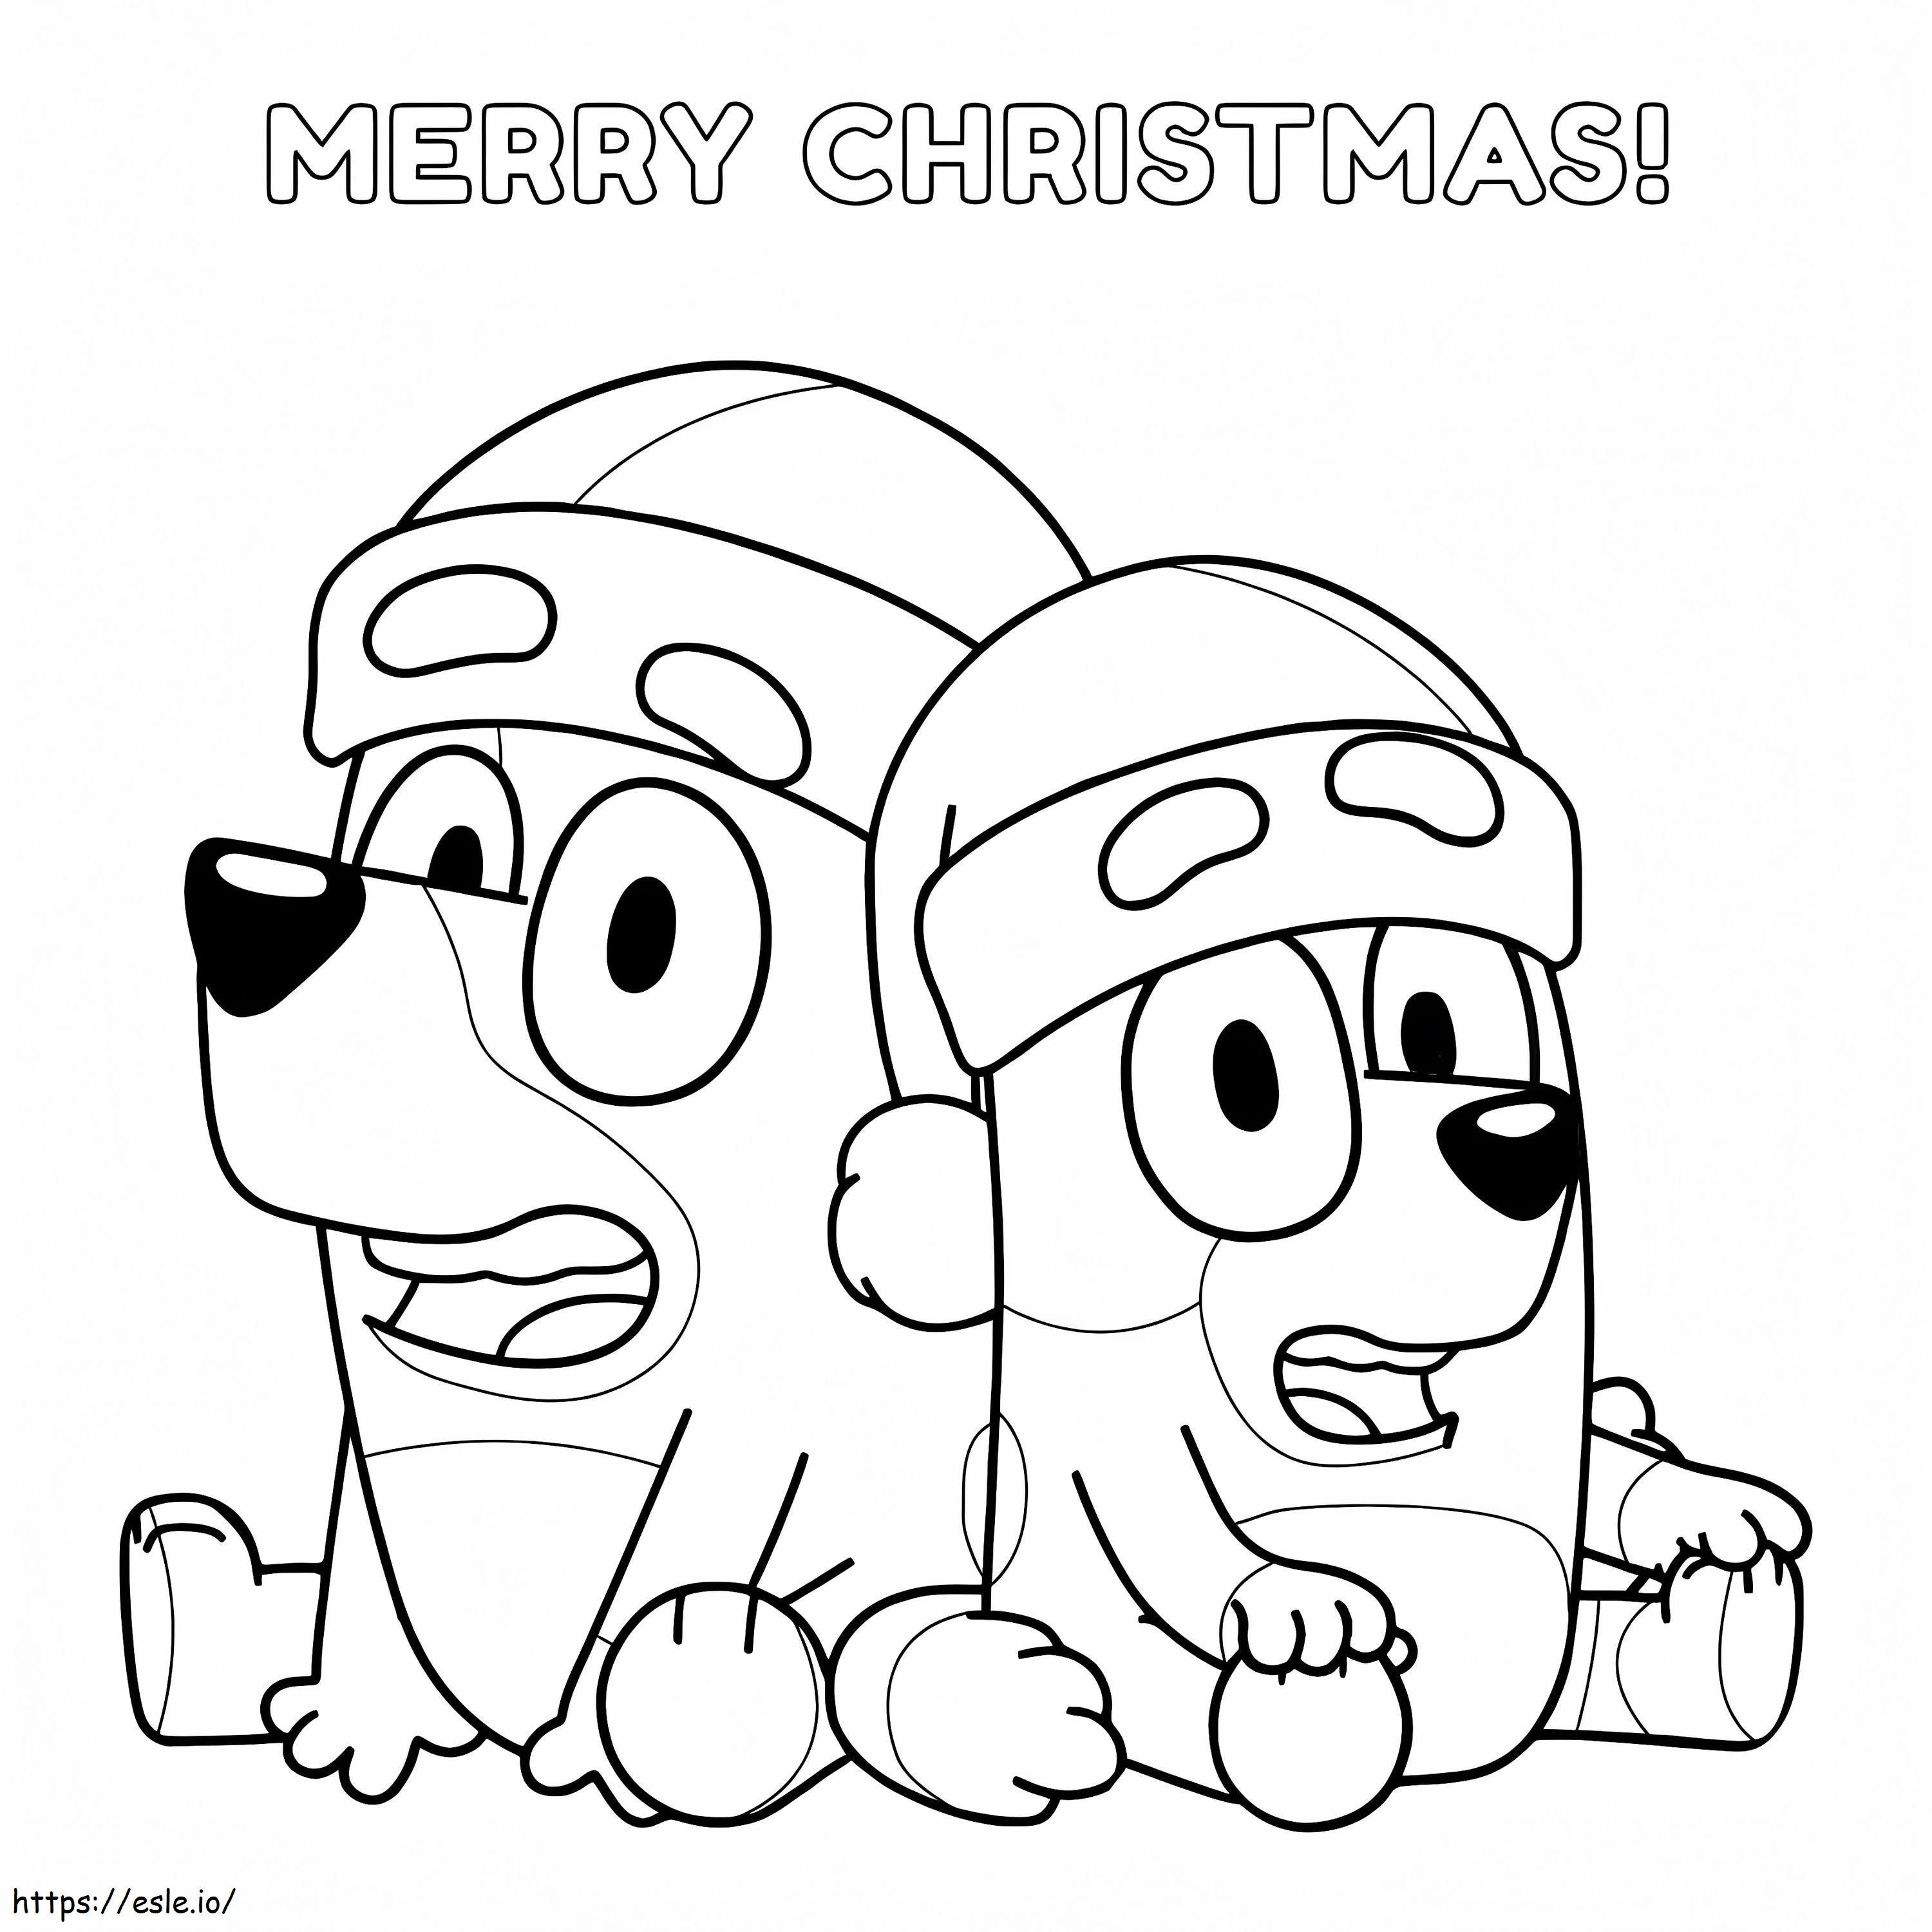 Bluey Merry Christmas coloring page